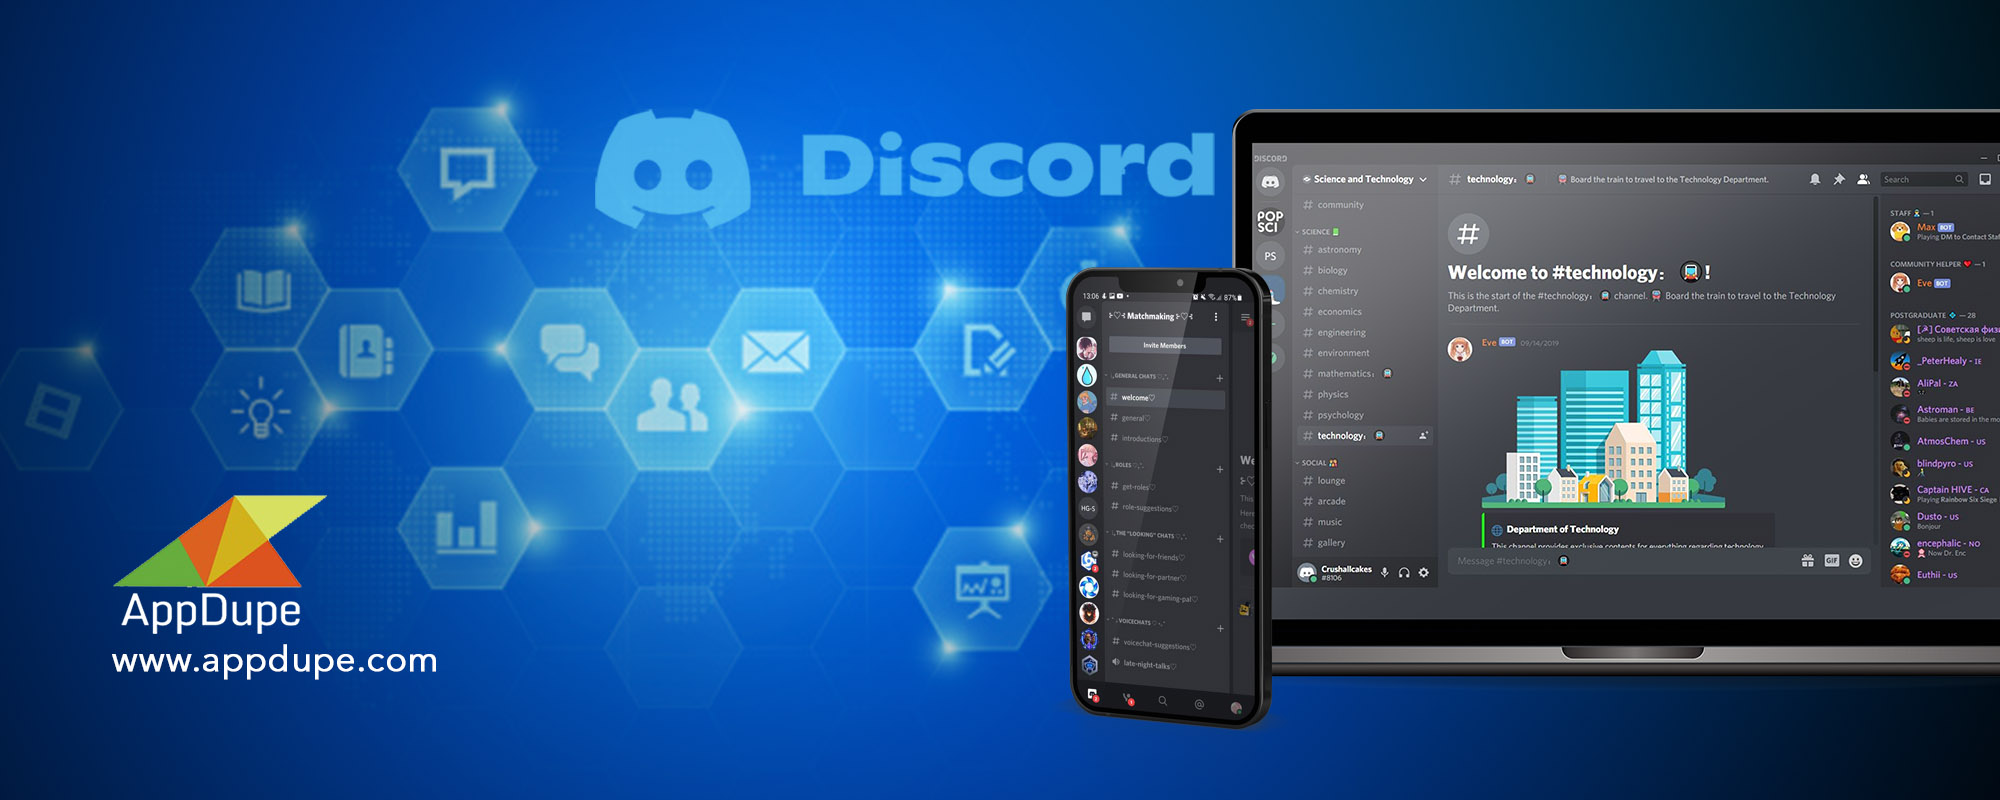 Article about Discord Marketing: Know Everything About Discord And How You Can Market Your Business Through This App